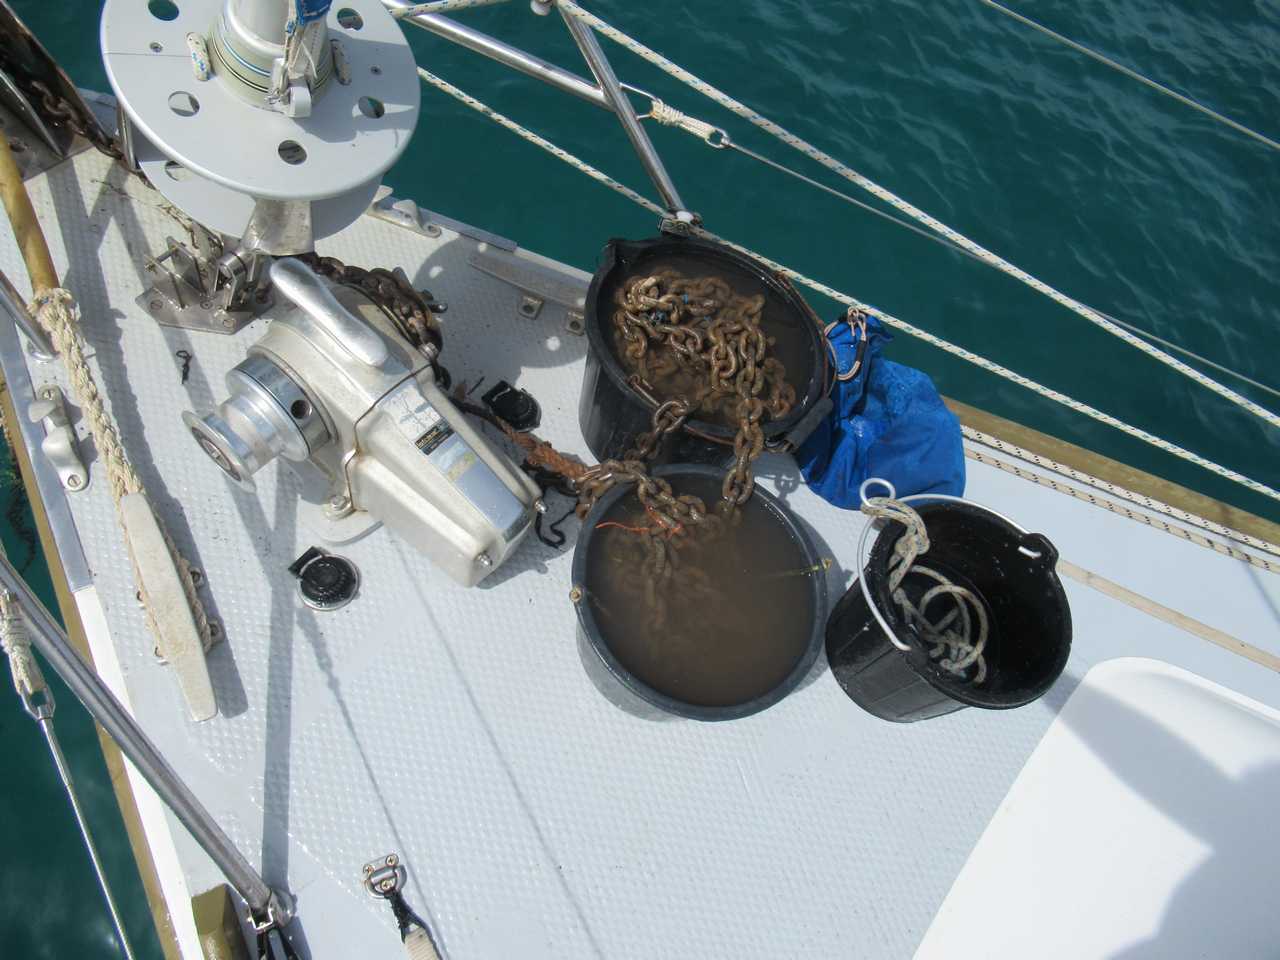 The yachting life is such a glamourous life. Cleaning the chain.